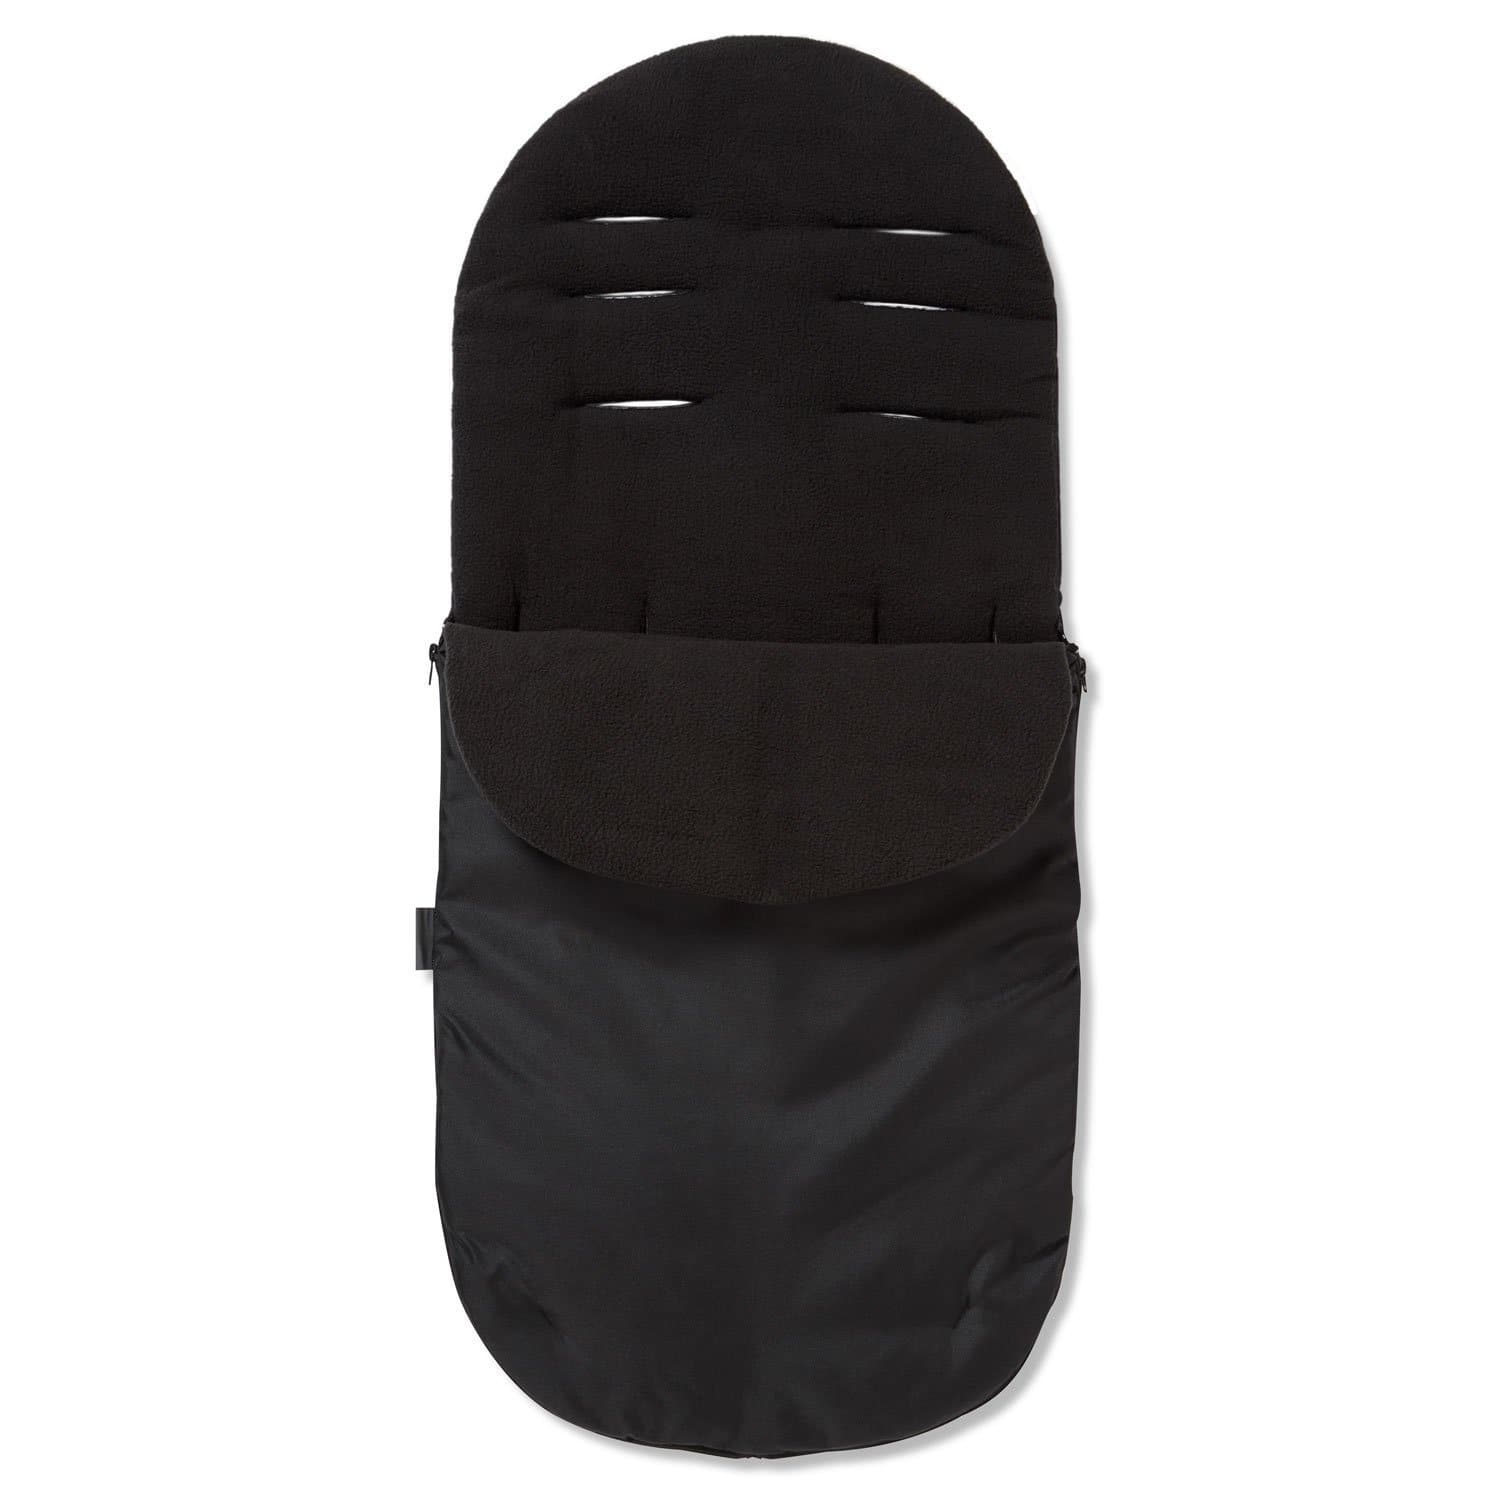 Footmuff / Cosy Toes Compatible with Babywelt - Black / Fits All Models | For Your Little One